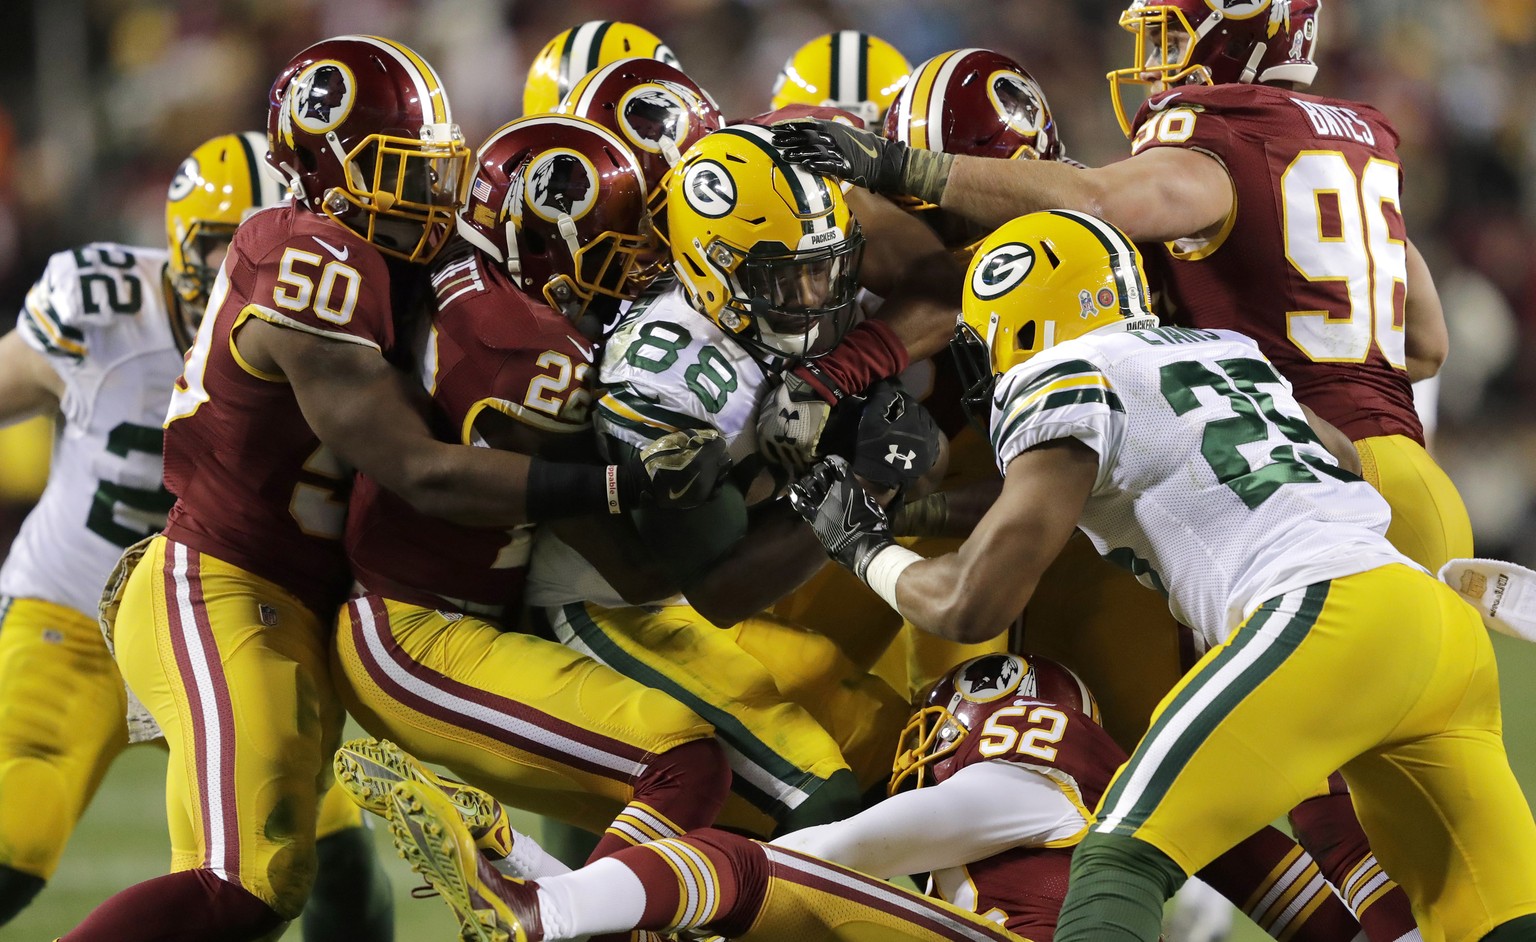 Nov 20, 2016; Landover, MD, USA; Green Bay Packers&#039; Ty Montgomery (88) carries the ball as the Washington Redskins defend during the second half at FedEx Field. Mandatory Credit: Dan Powers/Wisco ...